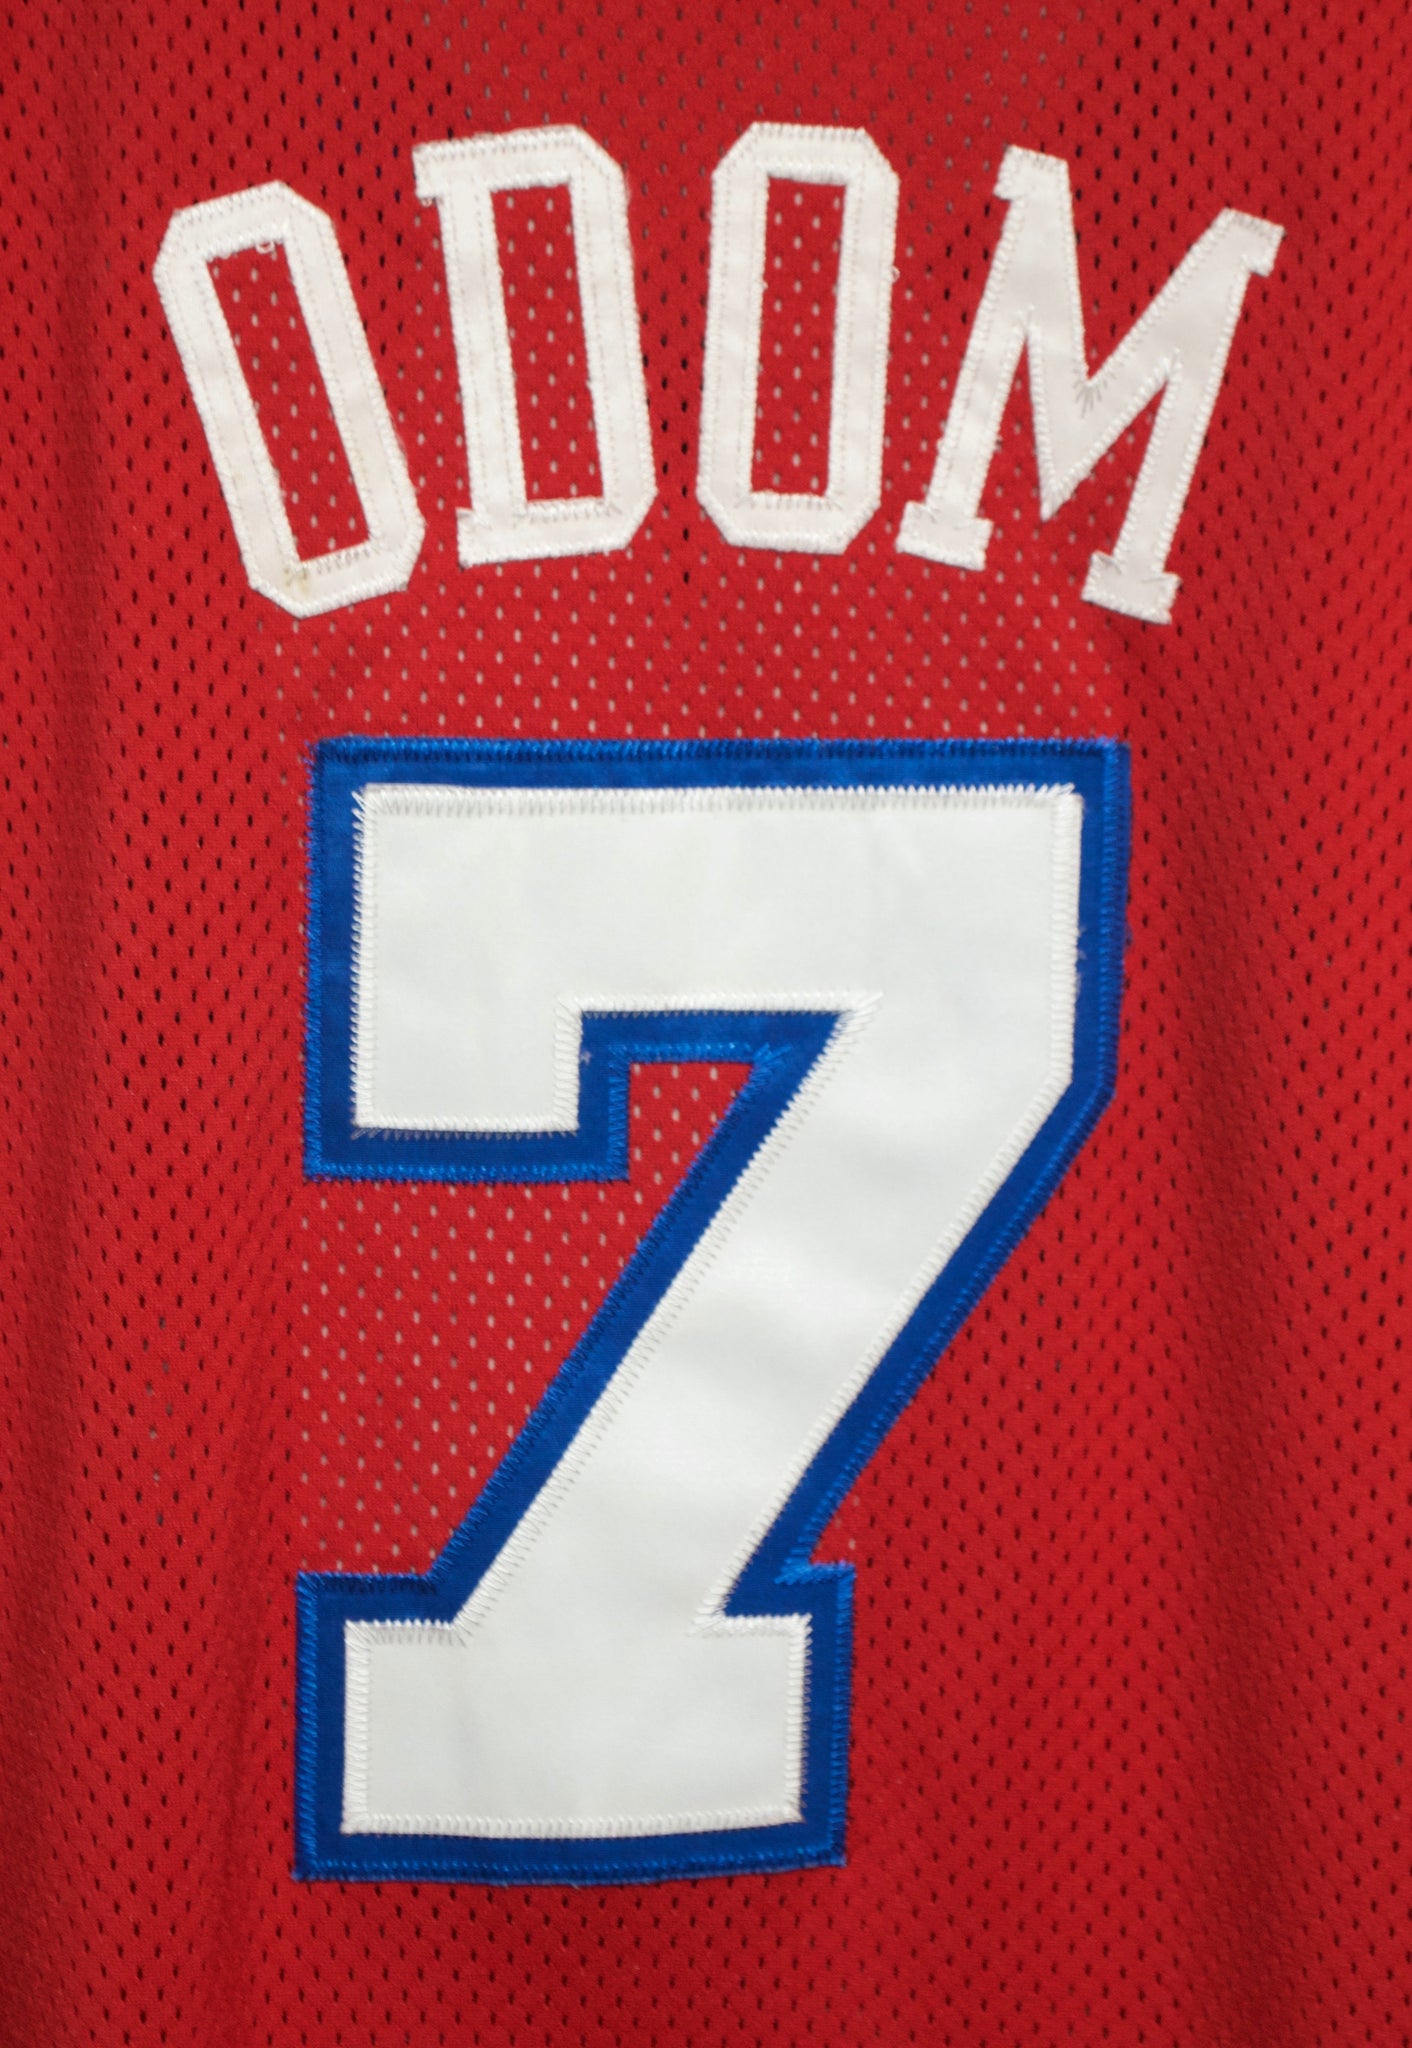 Lamar Odom Clippers Authentic Jersey sz 56/3XL – First Team Vintage